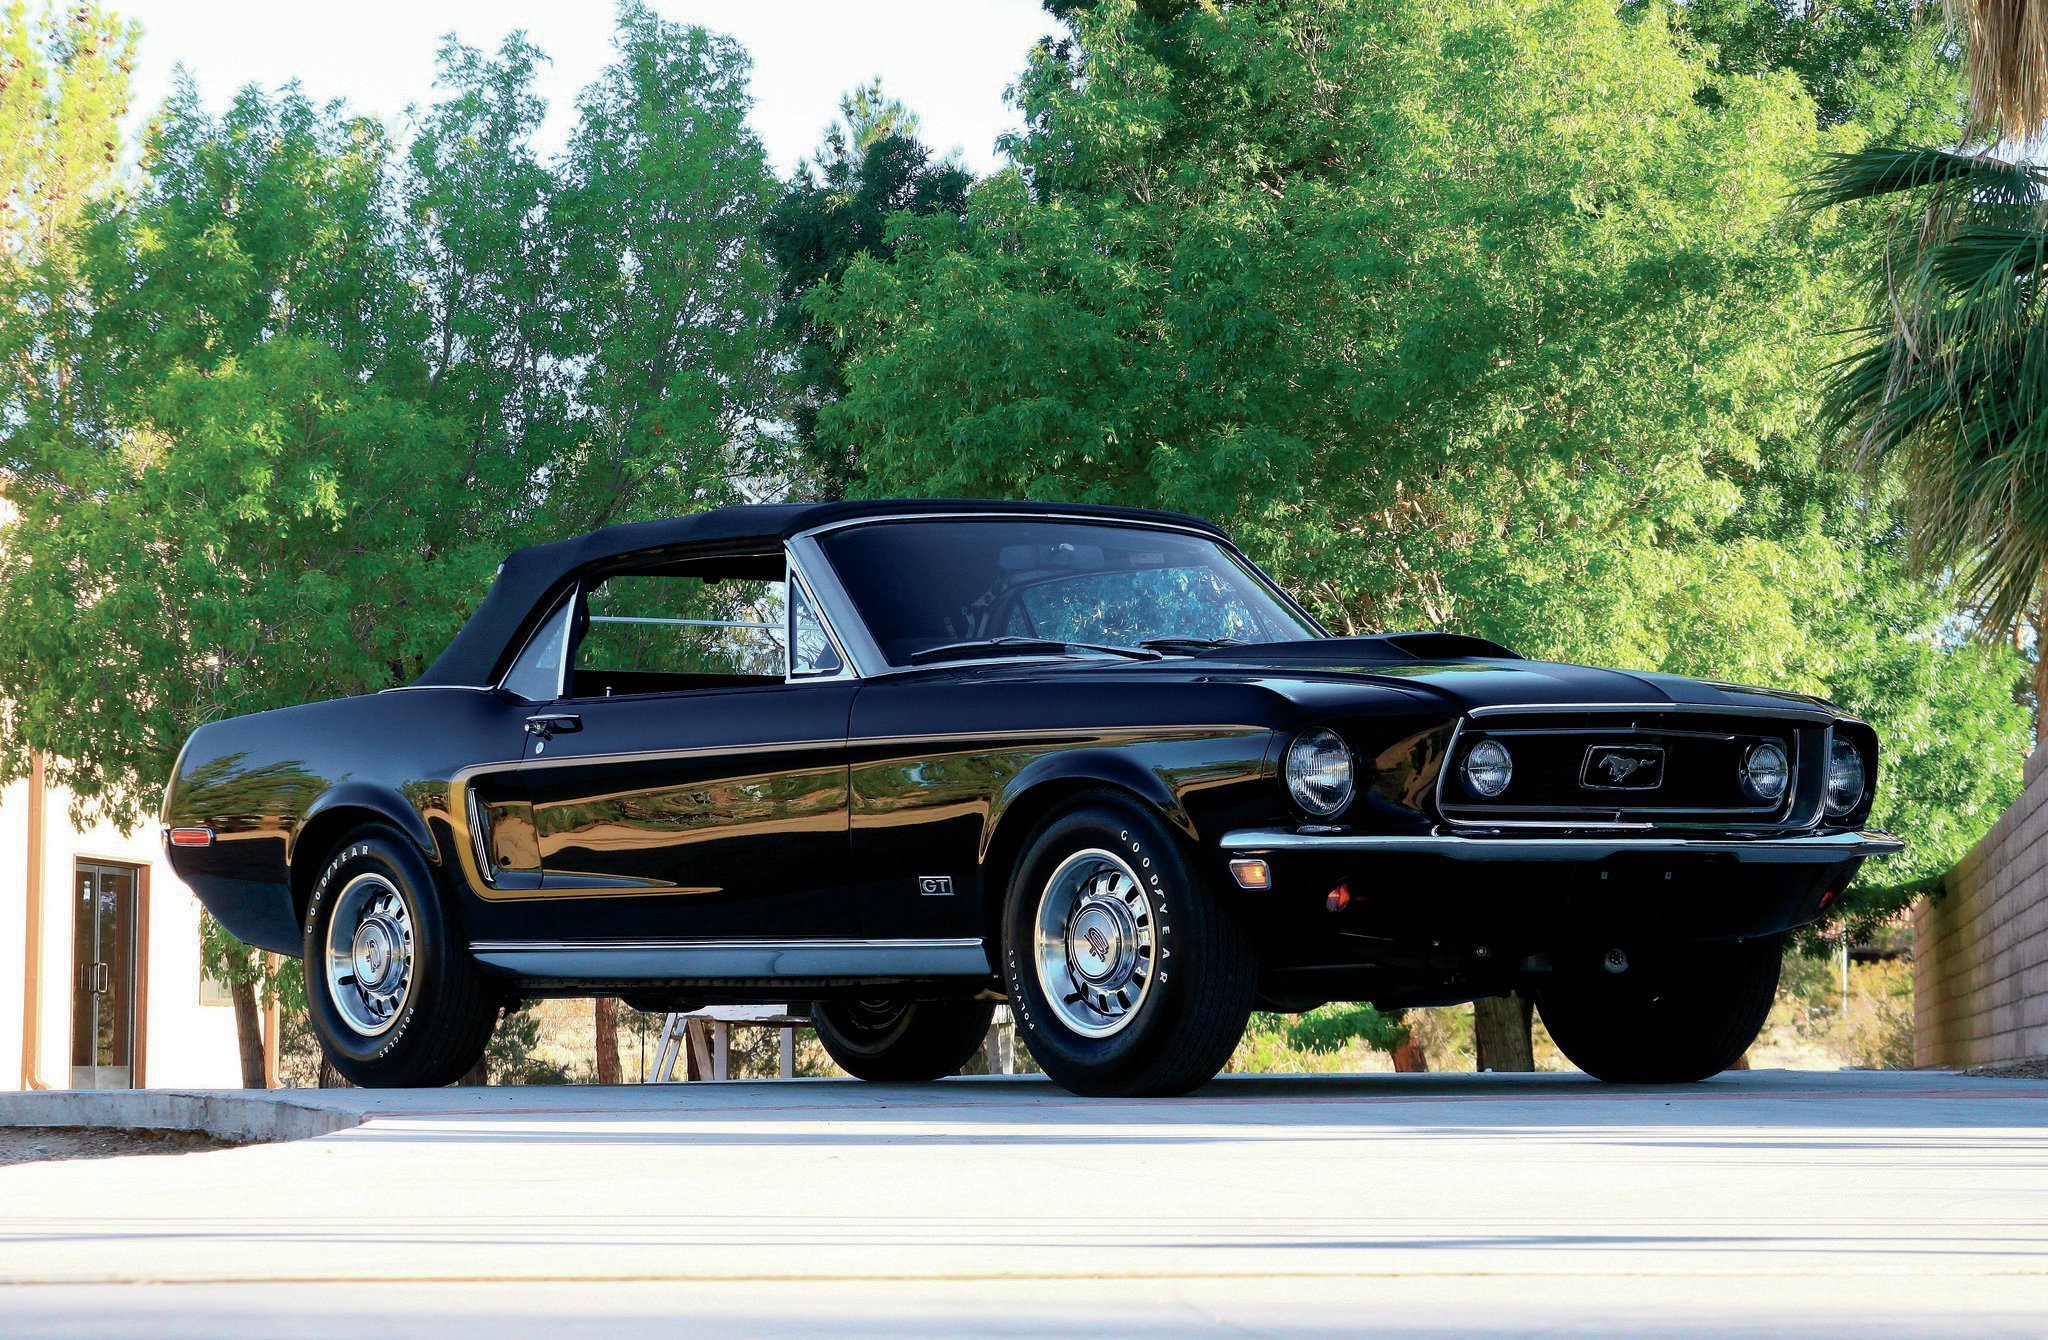 1968 1 2 Ford Mustang Cobra Jet Black Photo Image Gallery - 1968 Ford Mustang Black , HD Wallpaper & Backgrounds